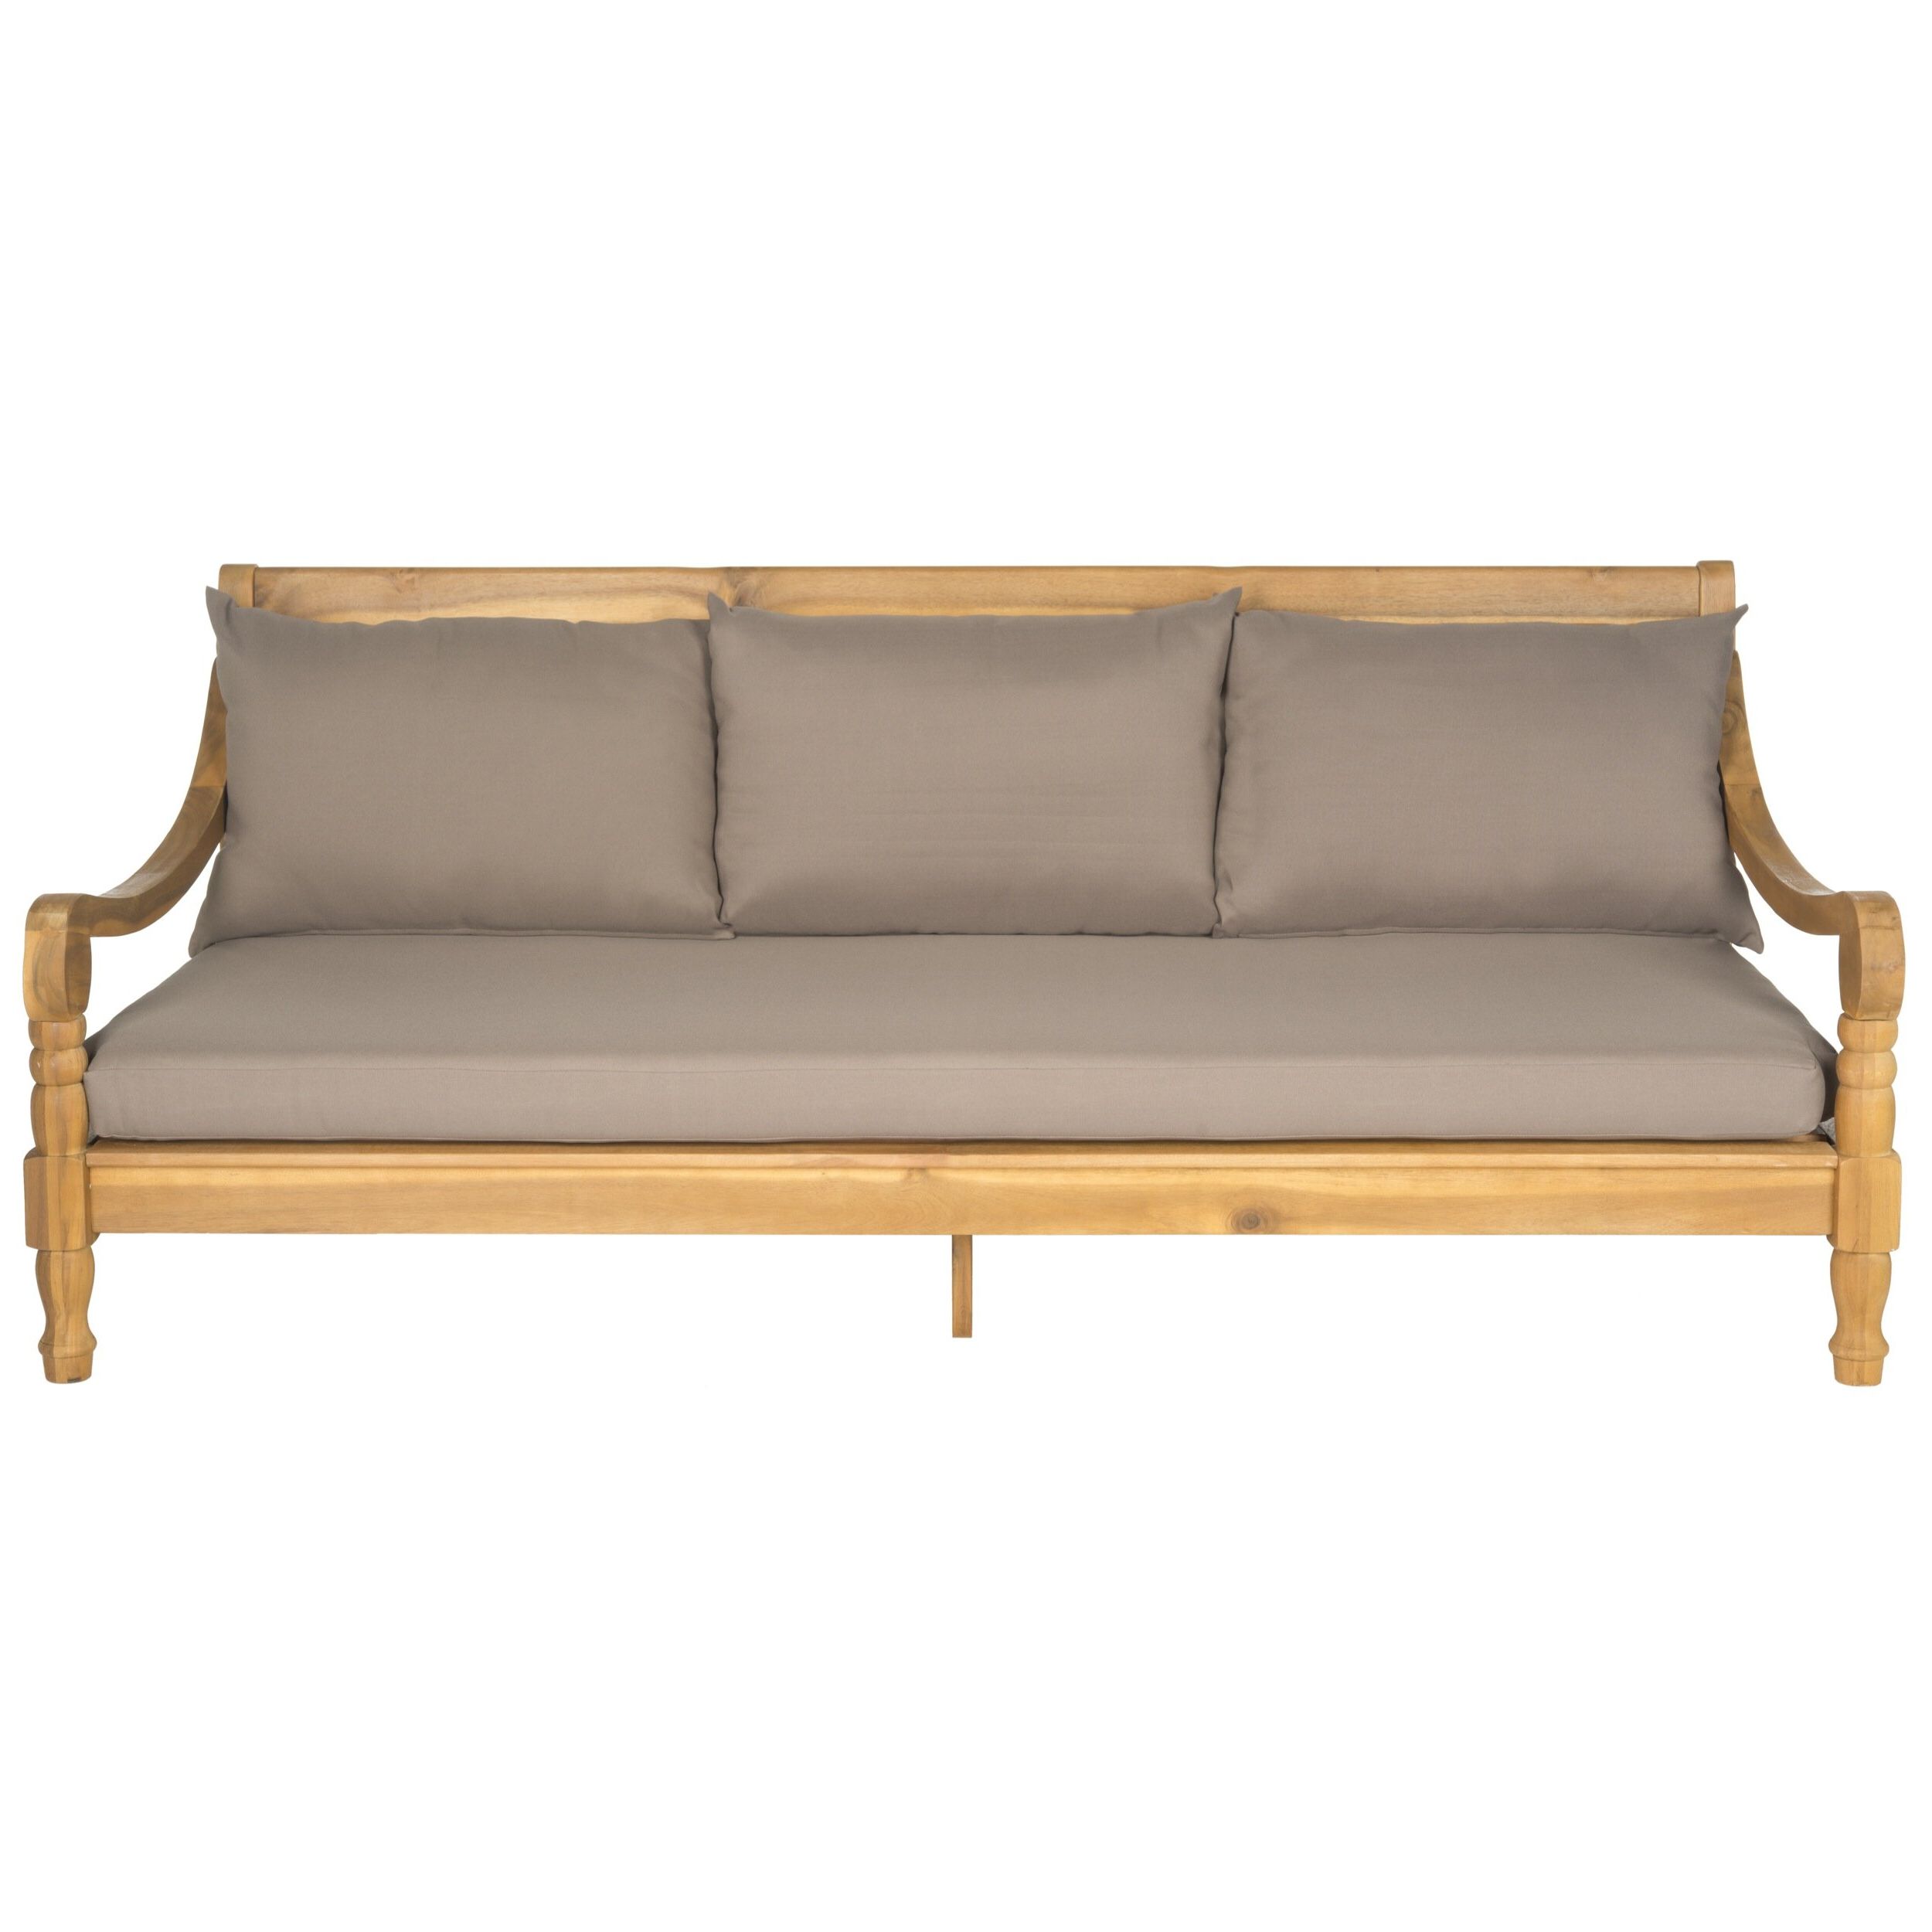 Roush Teak Patio Daybed With Cushions Intended For Trendy Ellanti Patio Daybeds With Cushions (View 17 of 25)